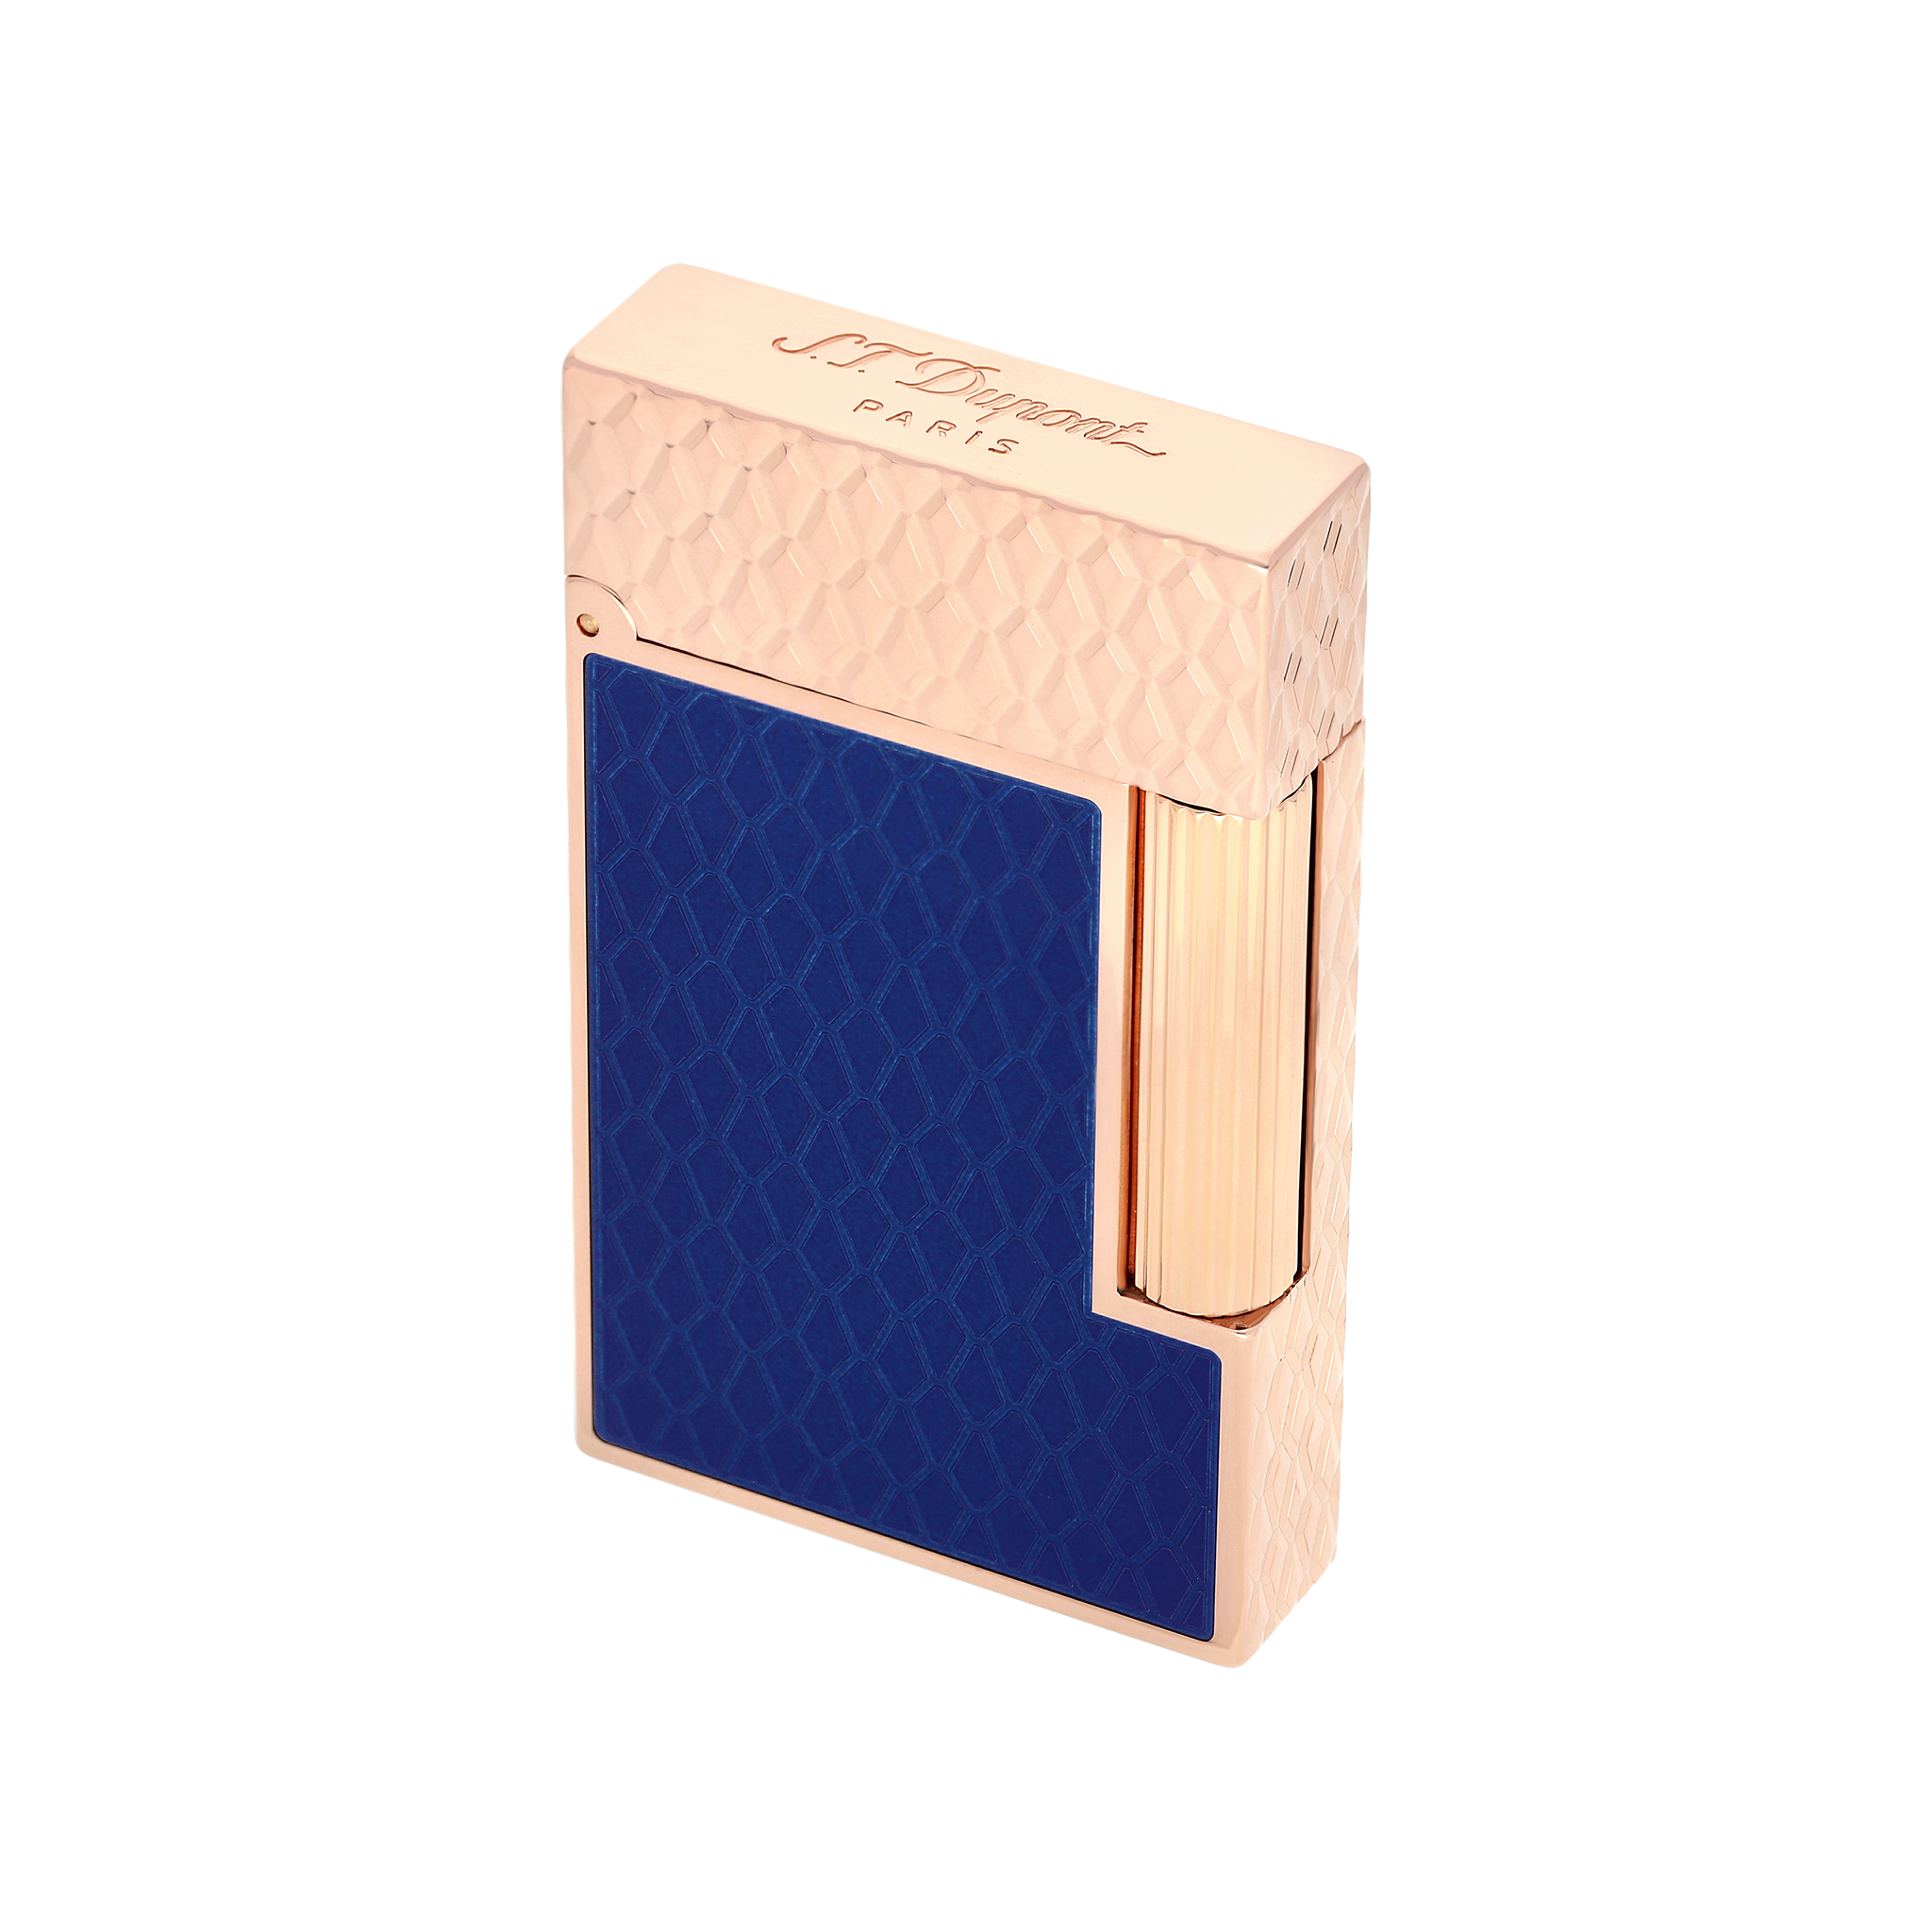 Ligne line 2 Bright blue/ lacquer/ lacquer | S.T. luxury gold DUPONT pink lighters - – under Guilloche